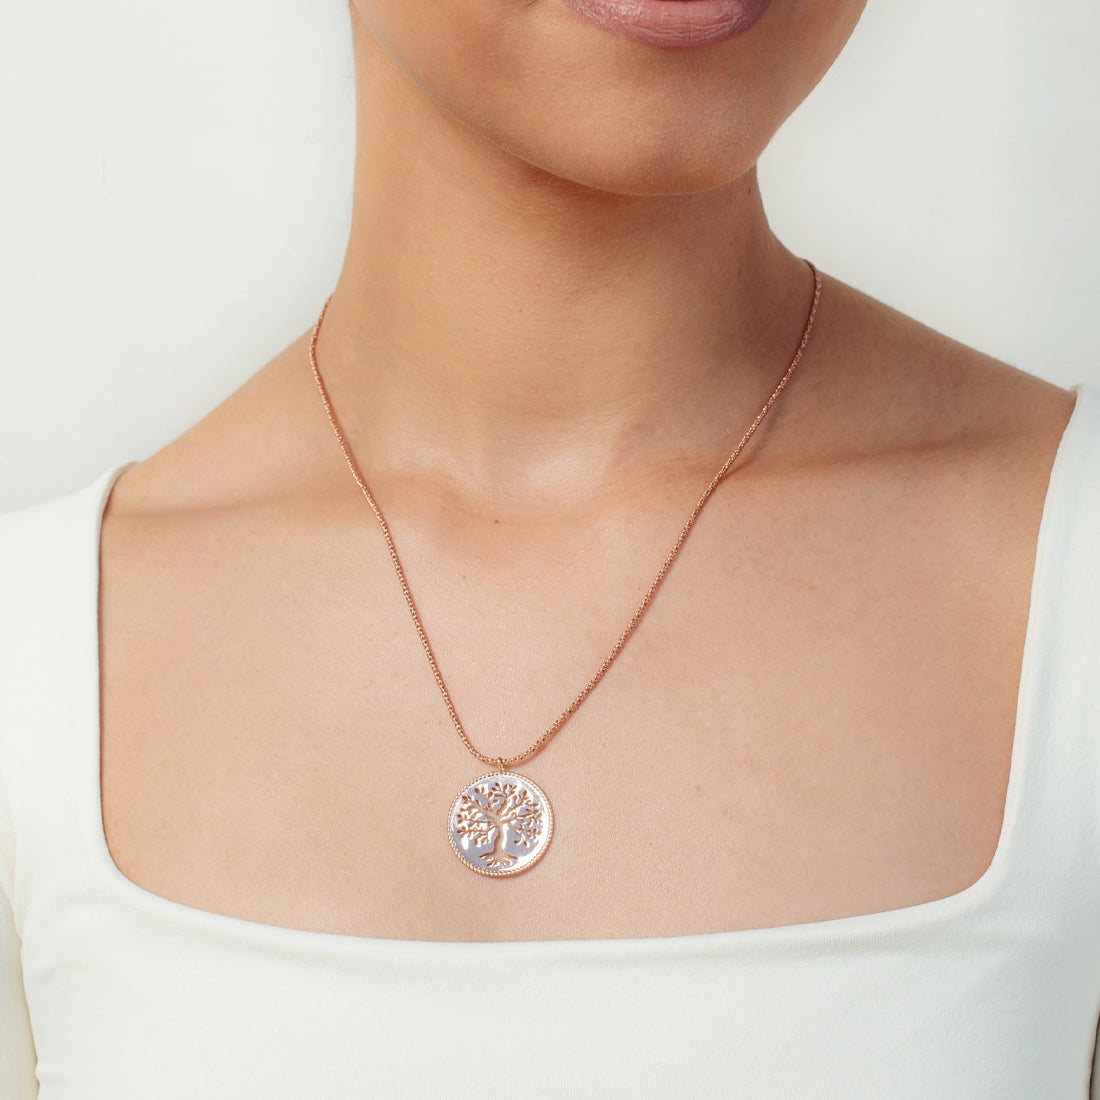 Christian woman wearing an 18k rose gold Olive Tree Necklace from the Rooted Collection by Rizen Jewelry.